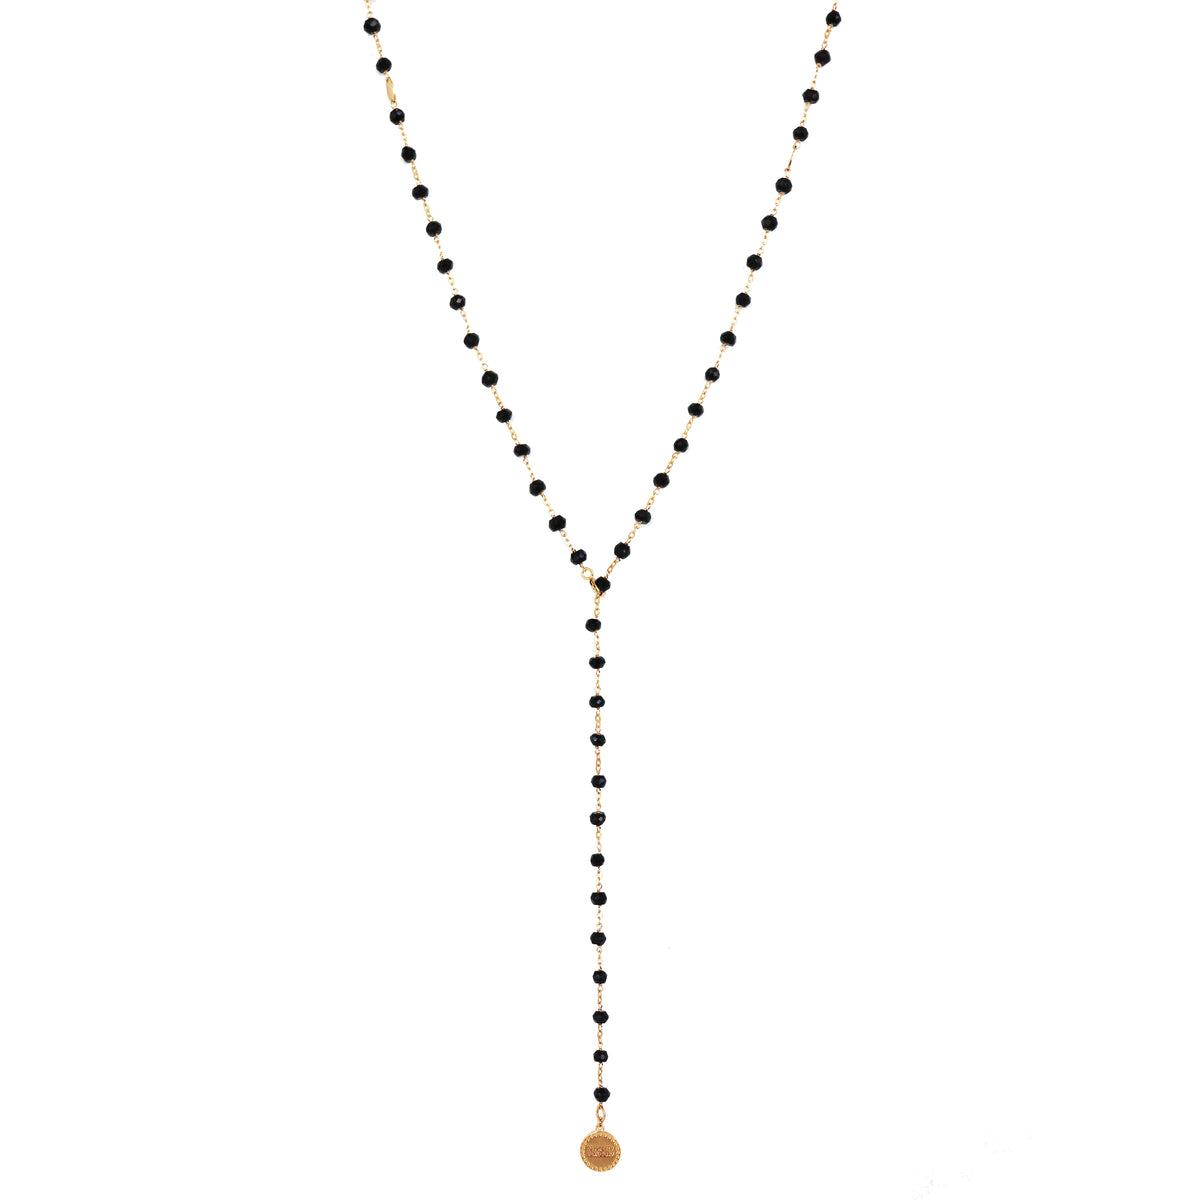 ICONIC LONG BEADED NECKLACE - BLACK ONYX &amp; GOLD 34&quot;